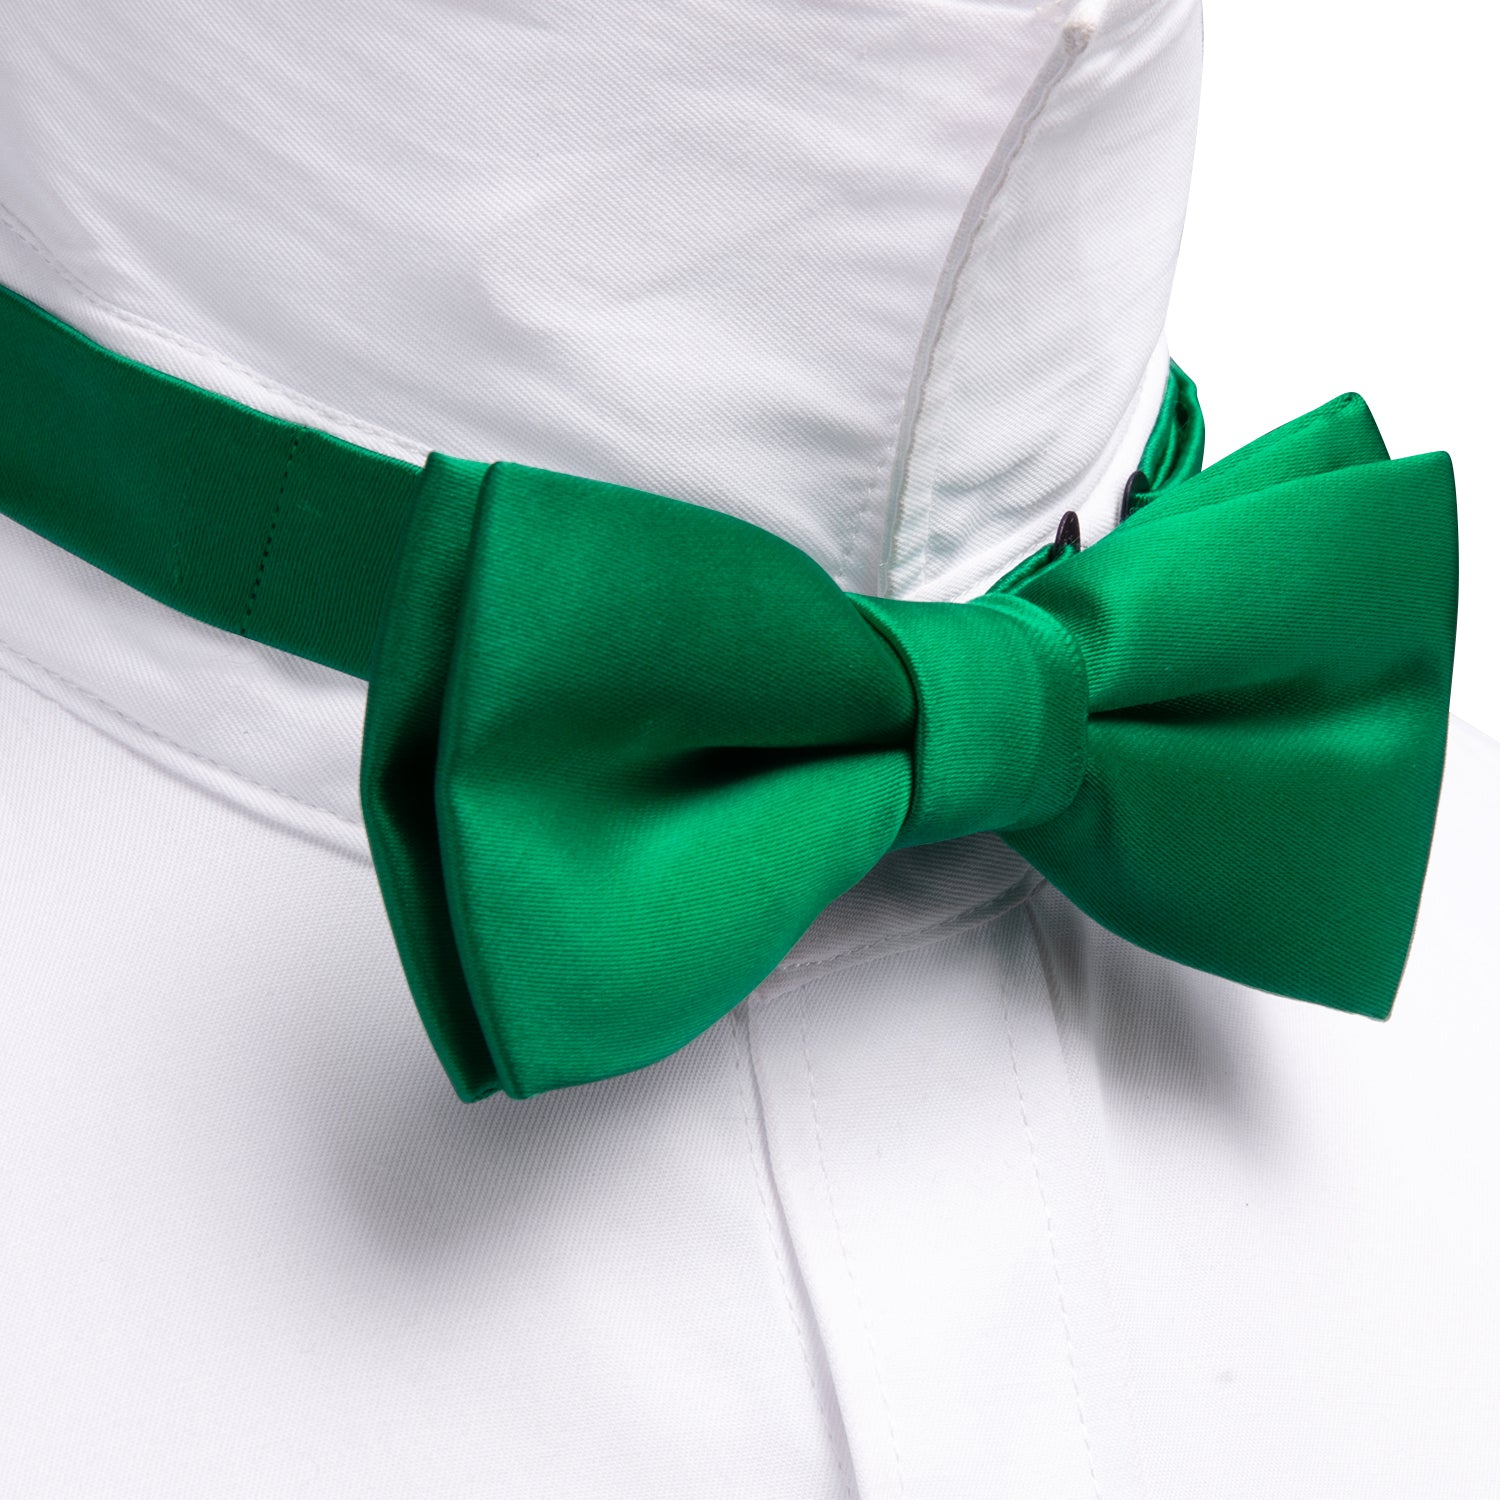 Barry.wang Kids Tie Light Green Solid Bow Tie Pocket Square Set Hot